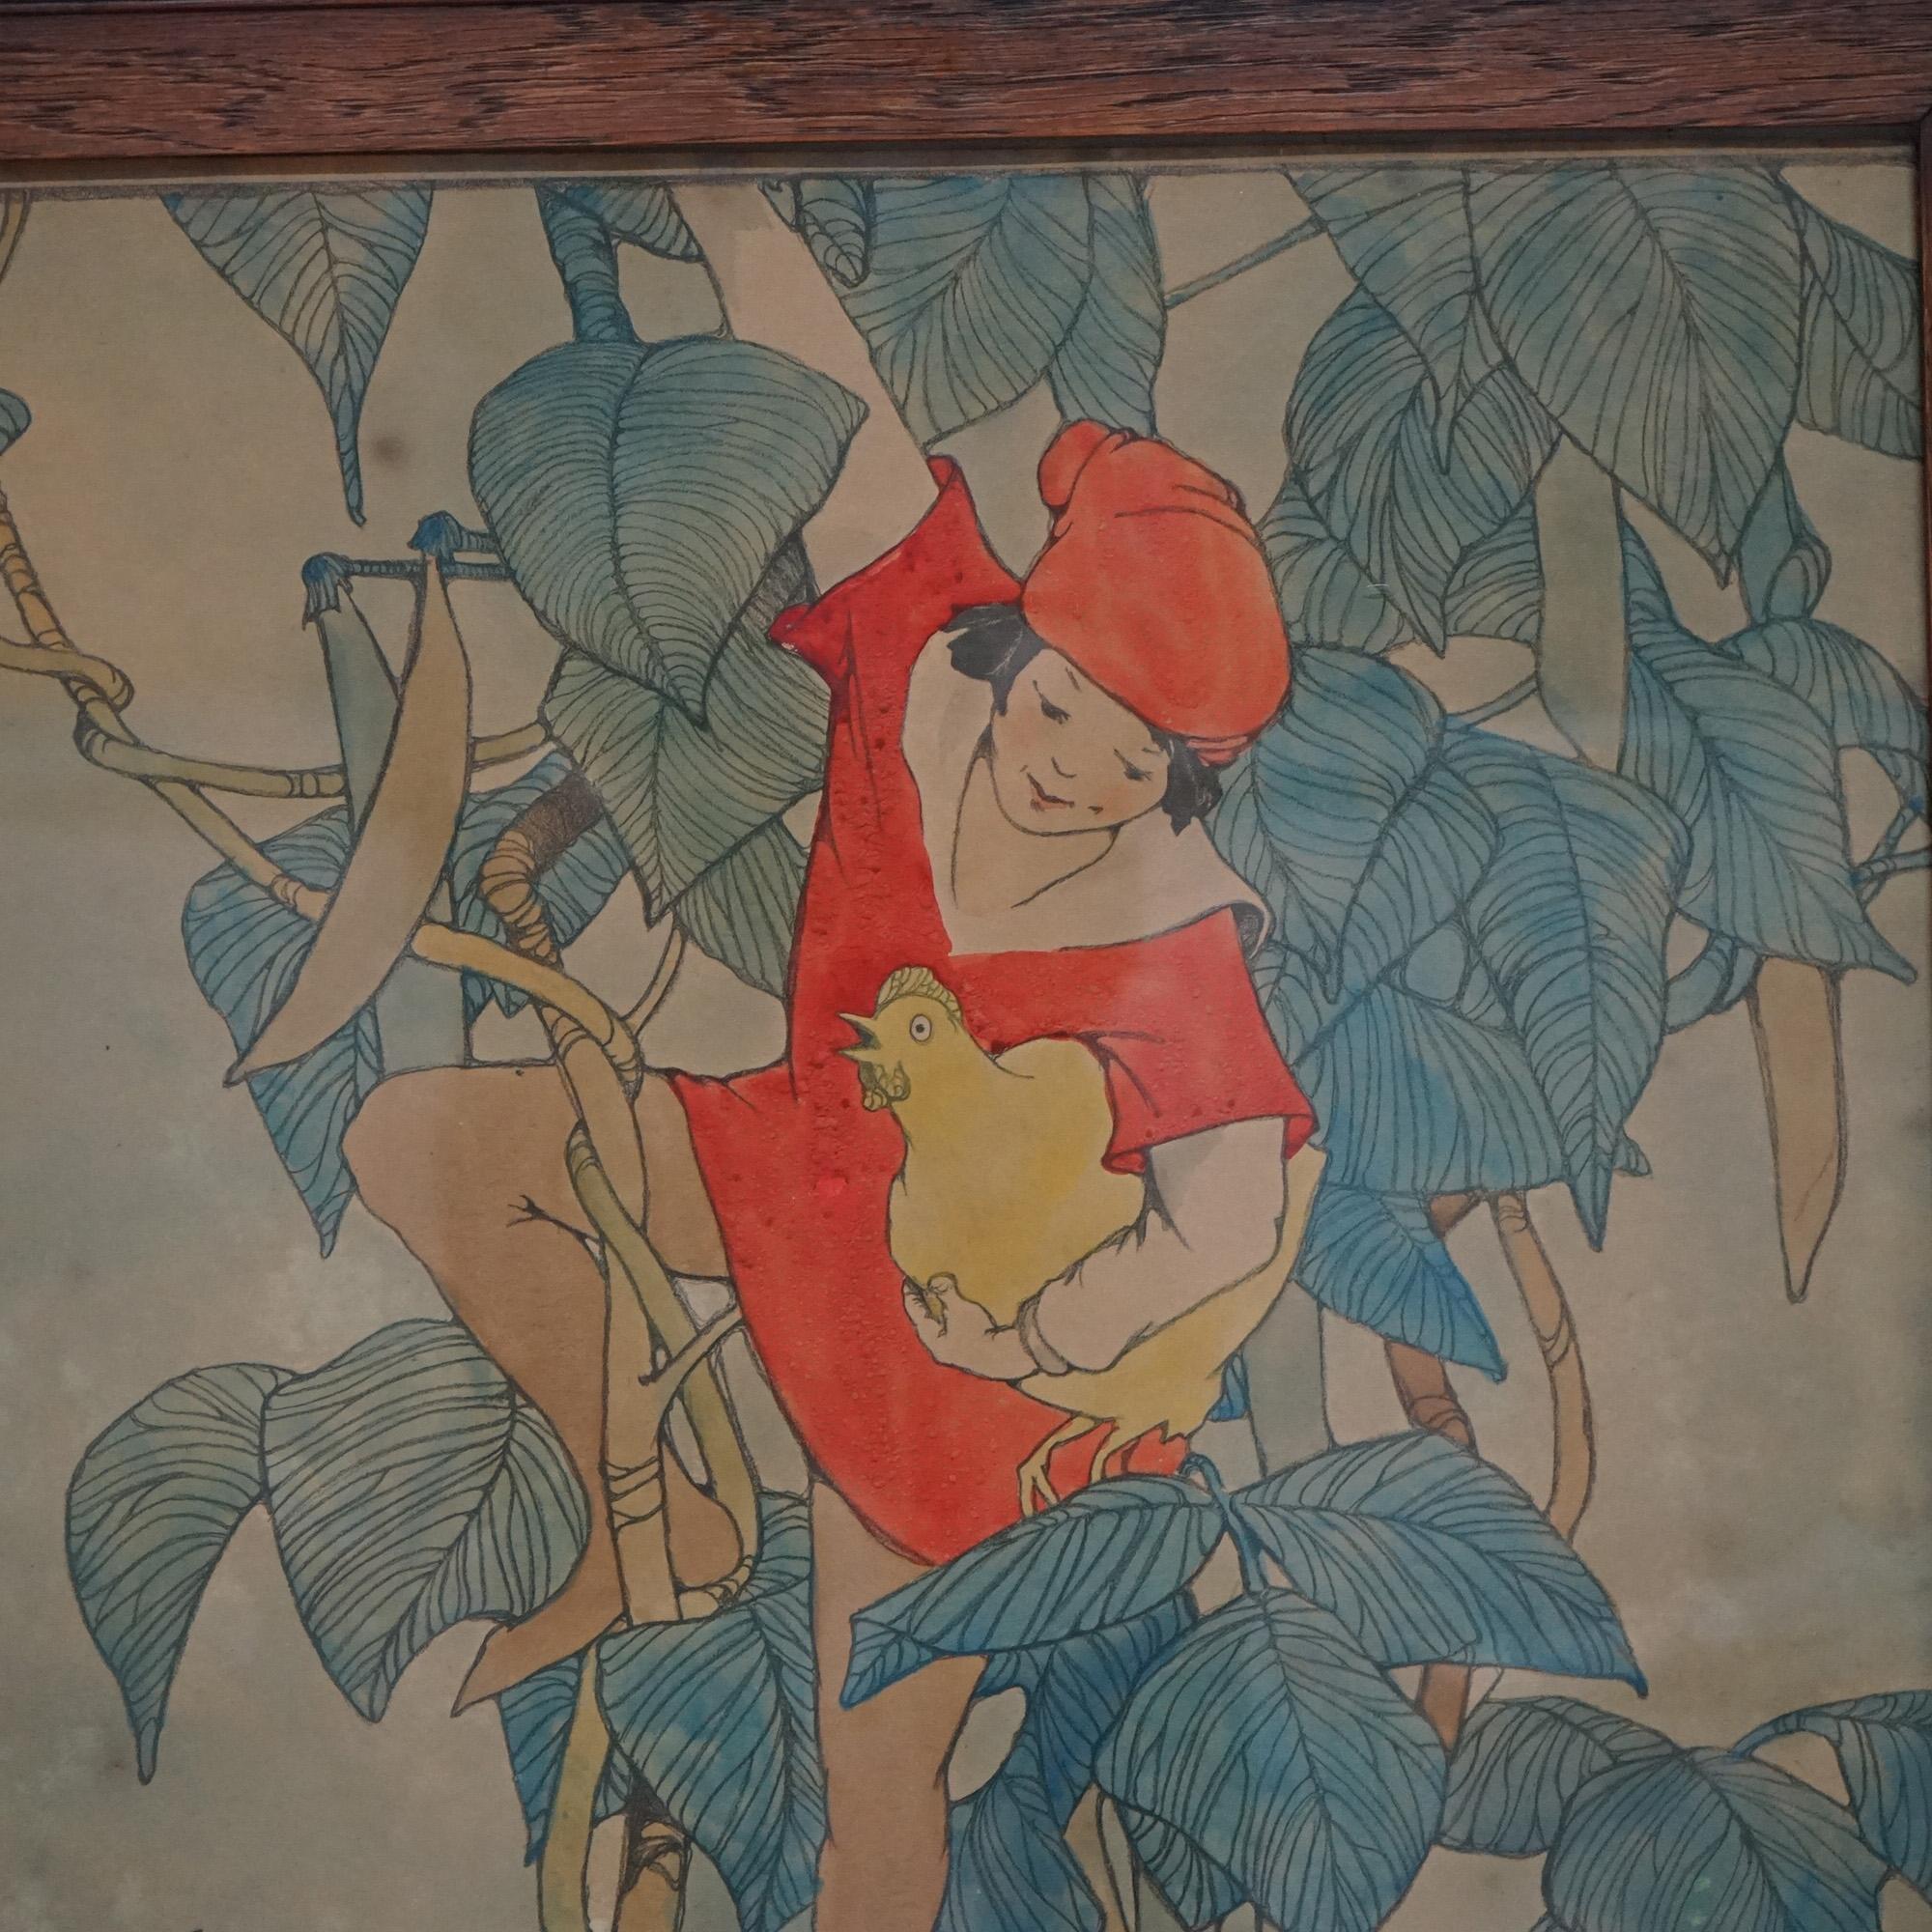 Antique Elizabeth Tyler Lithograph “Jack And The Beanstalk”, Framed, C1920 In Good Condition For Sale In Big Flats, NY